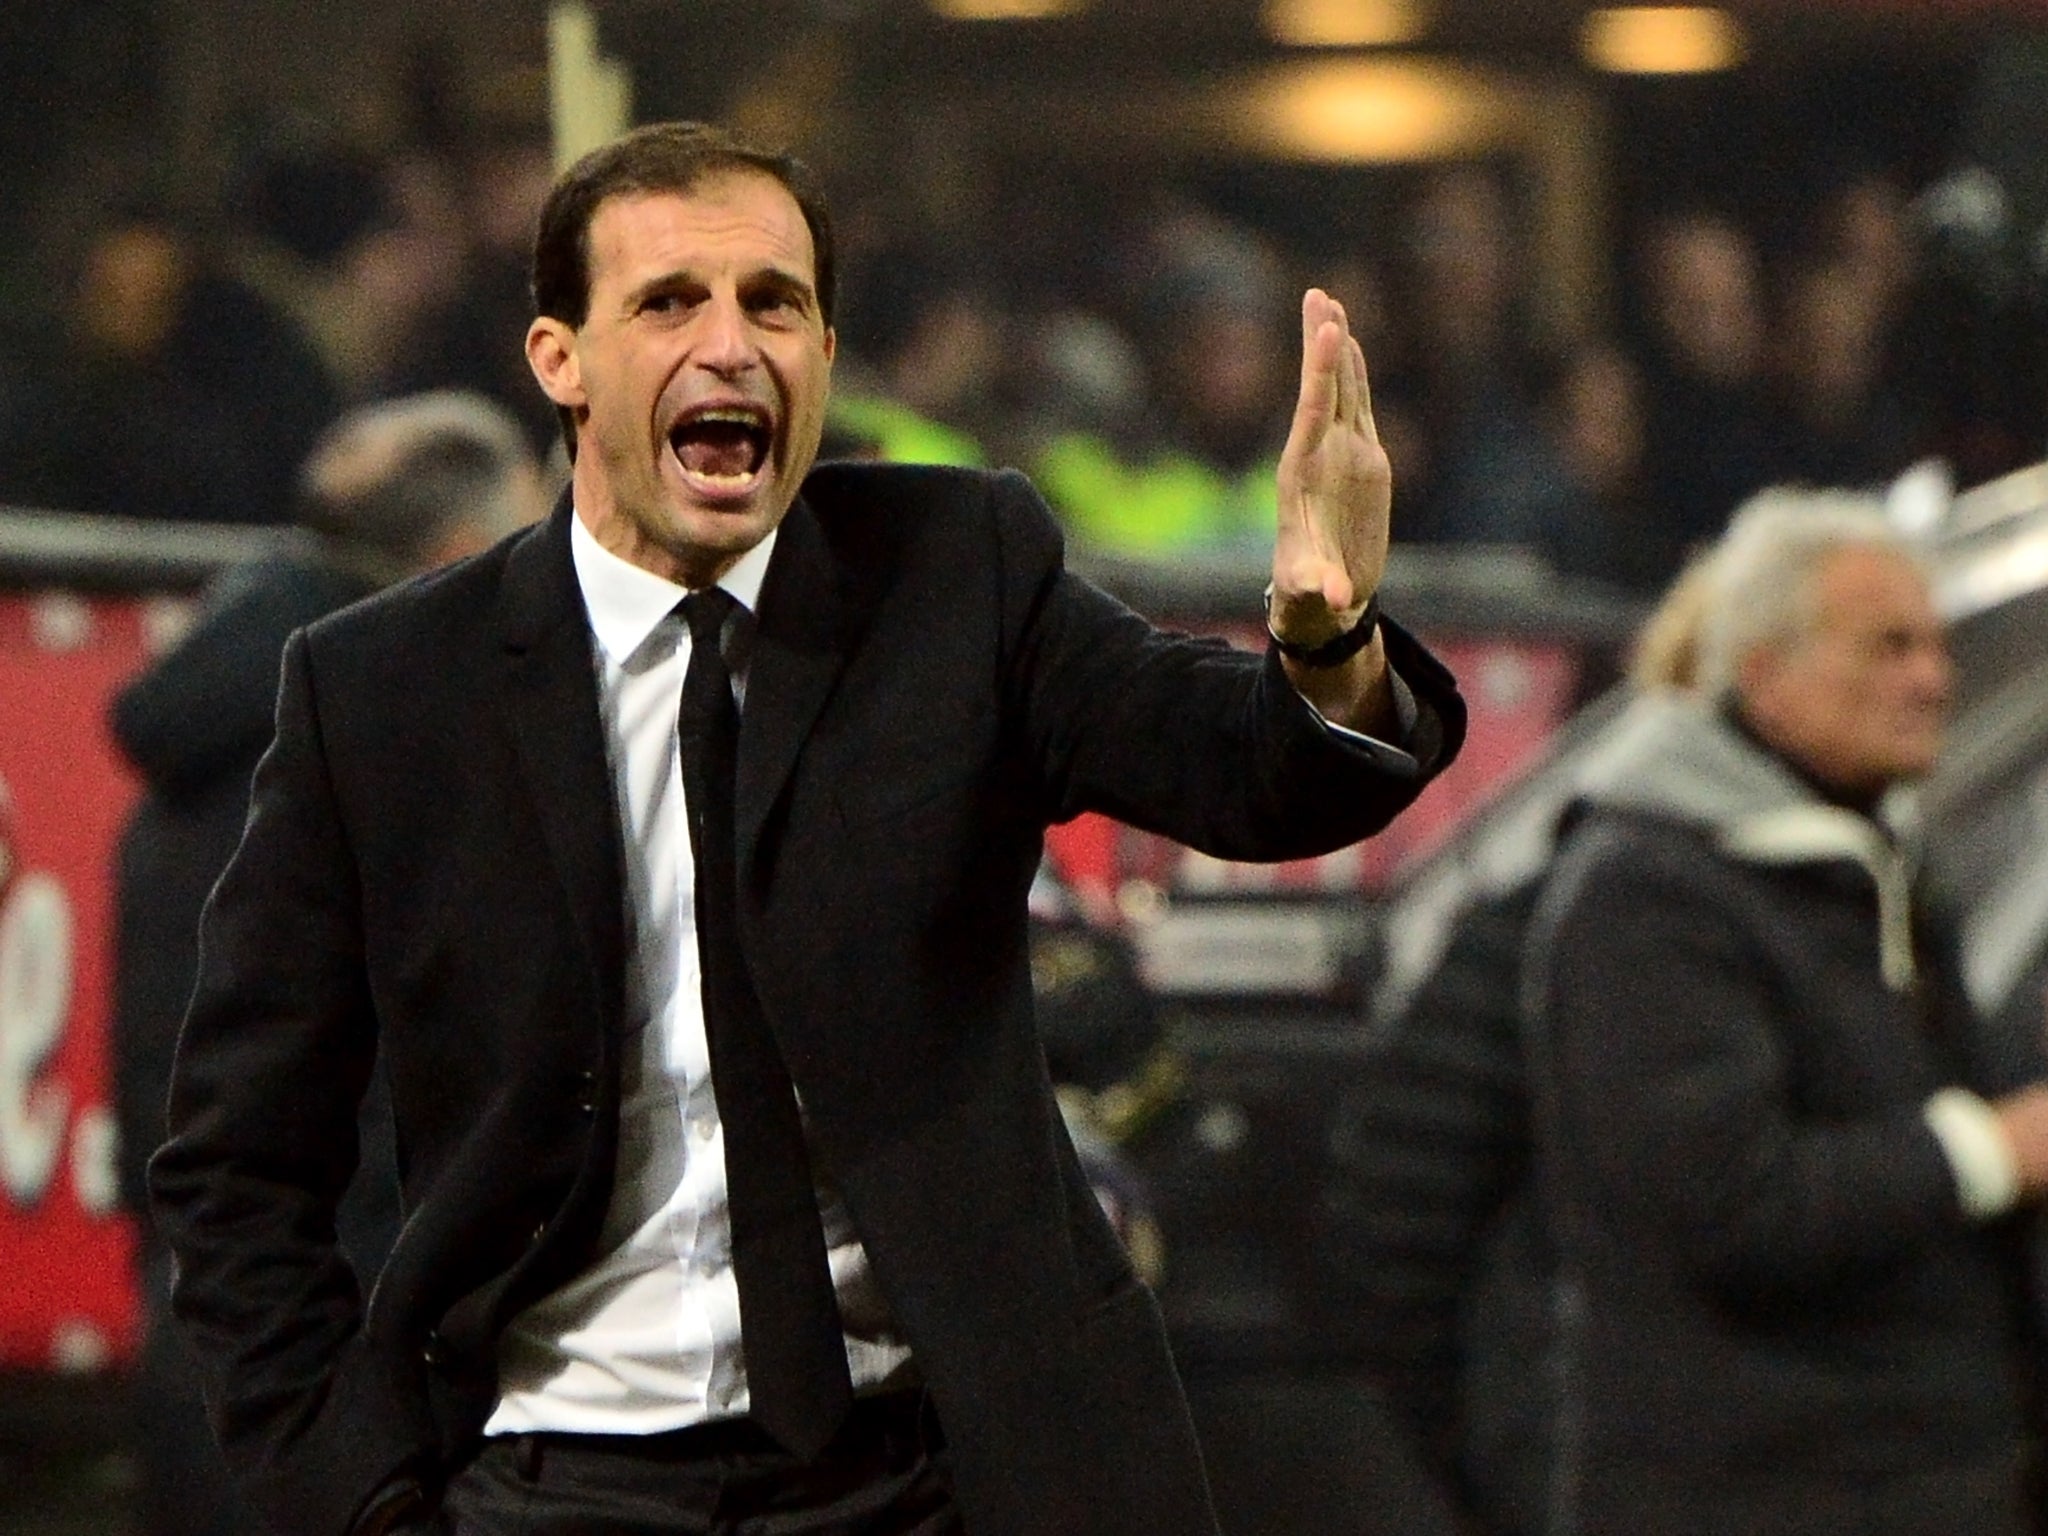 Massimiliano Allegri has confirmed he will be leaving AC Milan at the end of the season